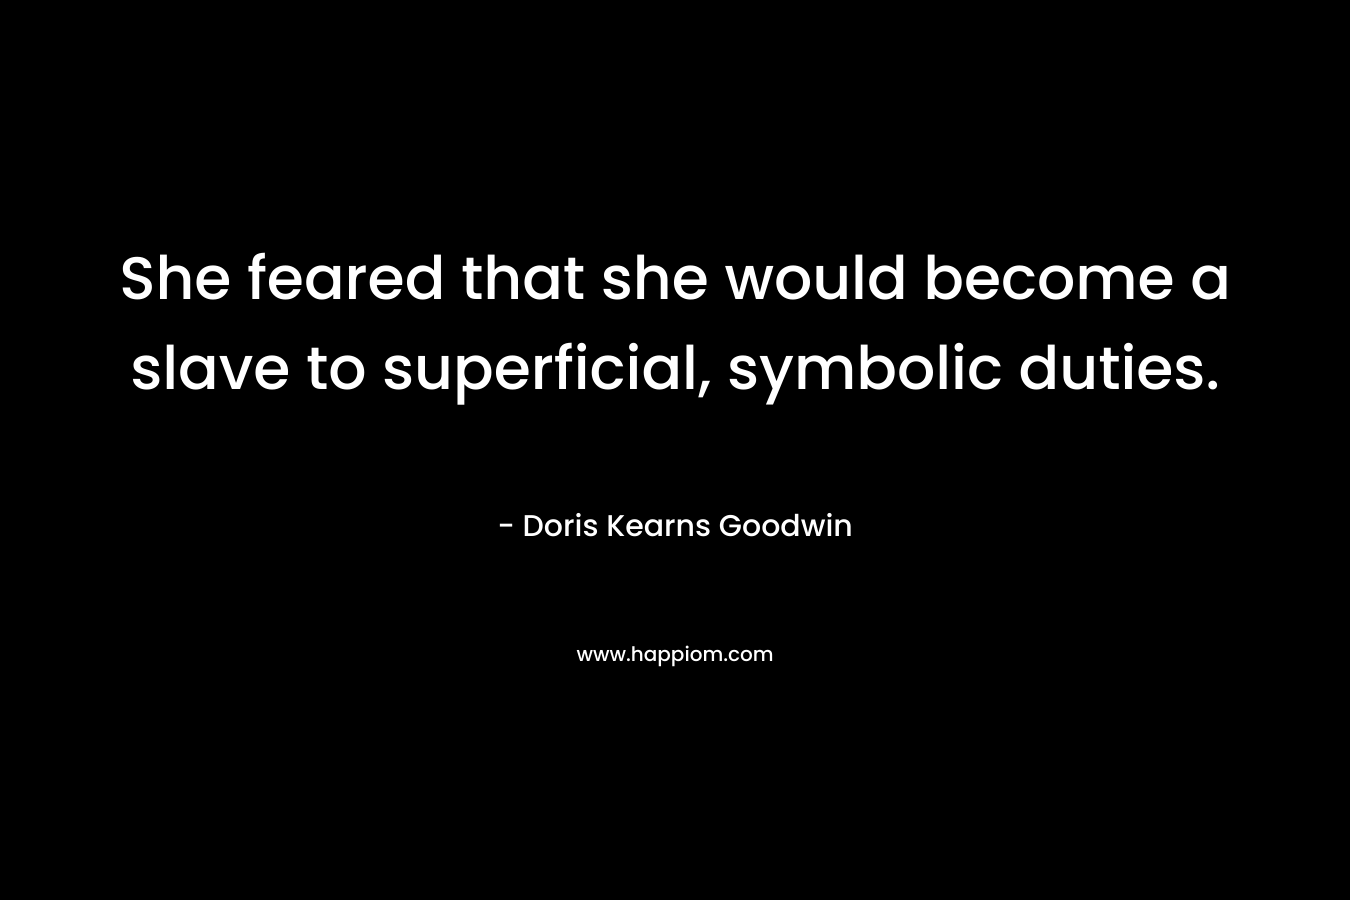 She feared that she would become a slave to superficial, symbolic duties. – Doris Kearns Goodwin